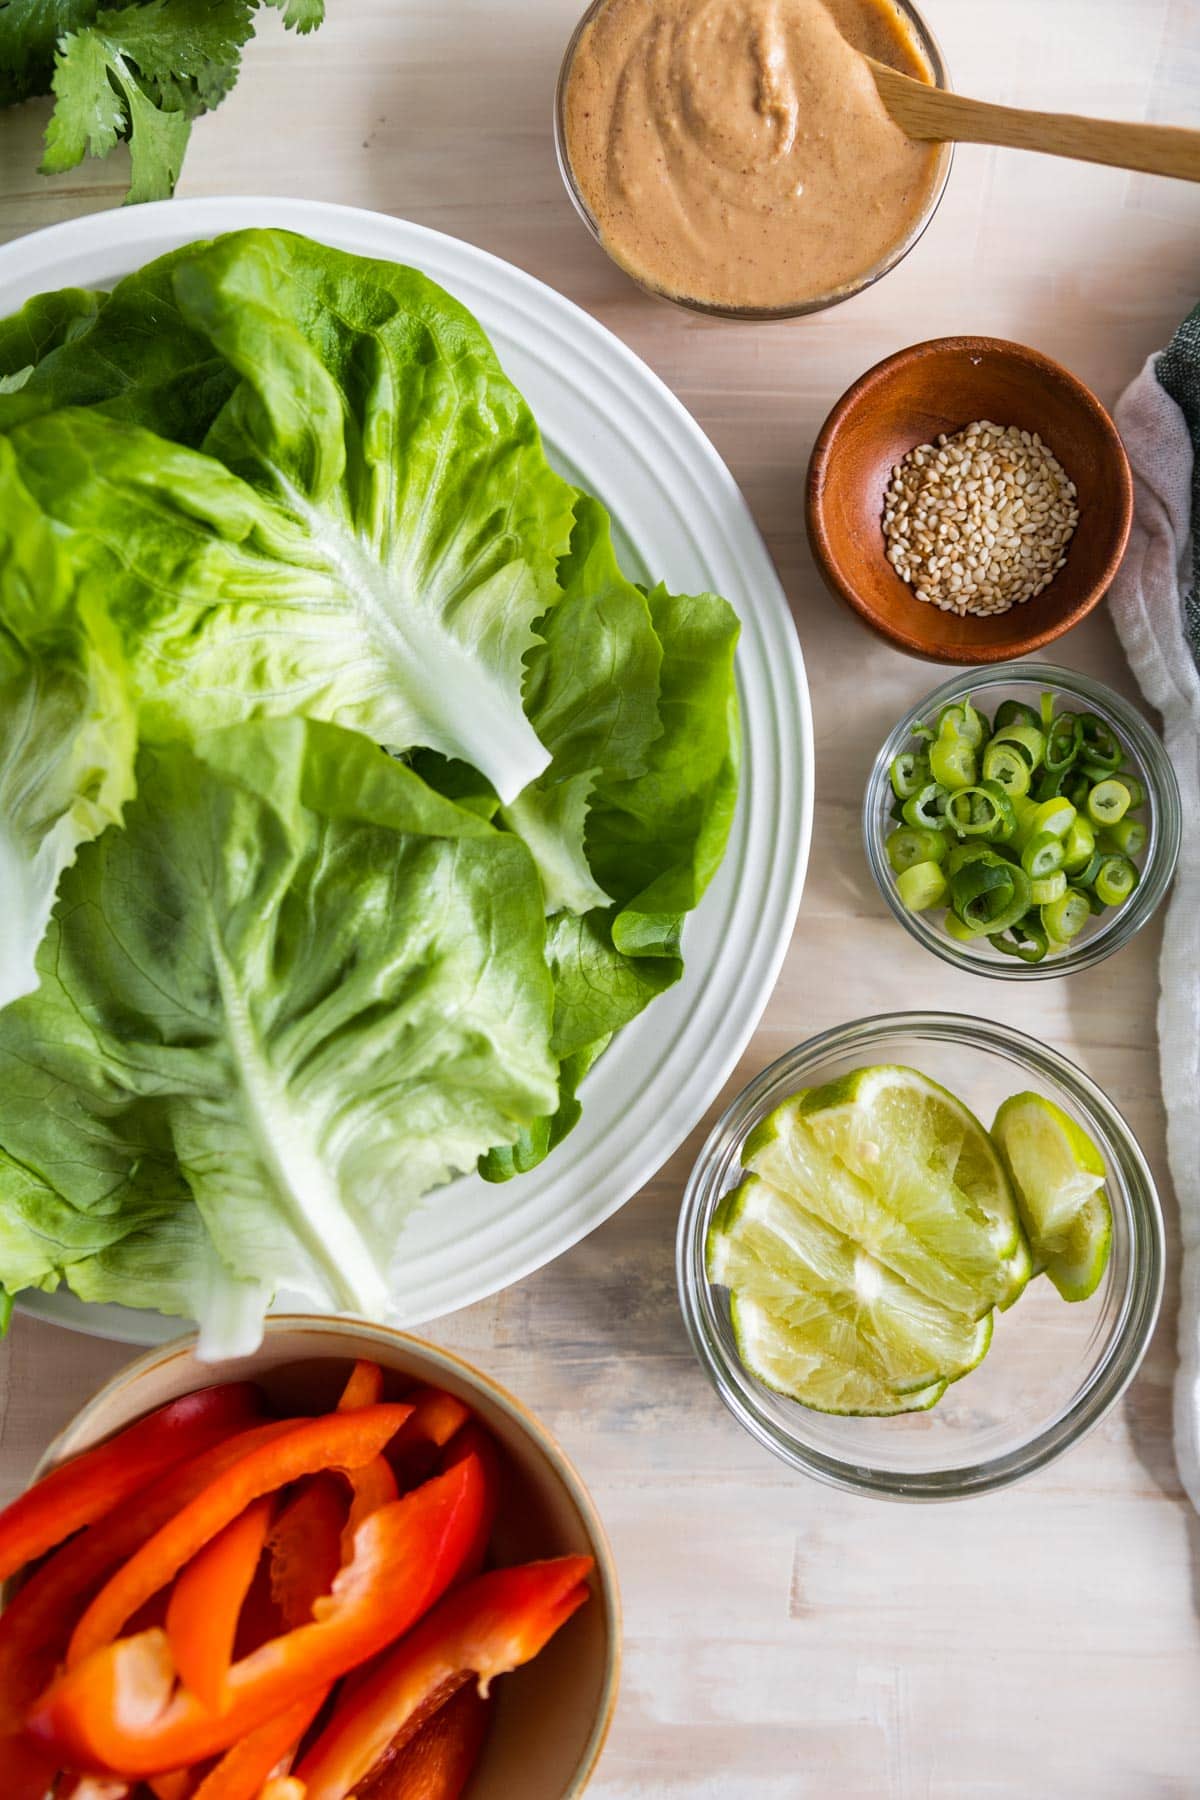 ingredients for lettuce wraps with peanut sauce displayed in bowls. Lettuce in on a plate. 